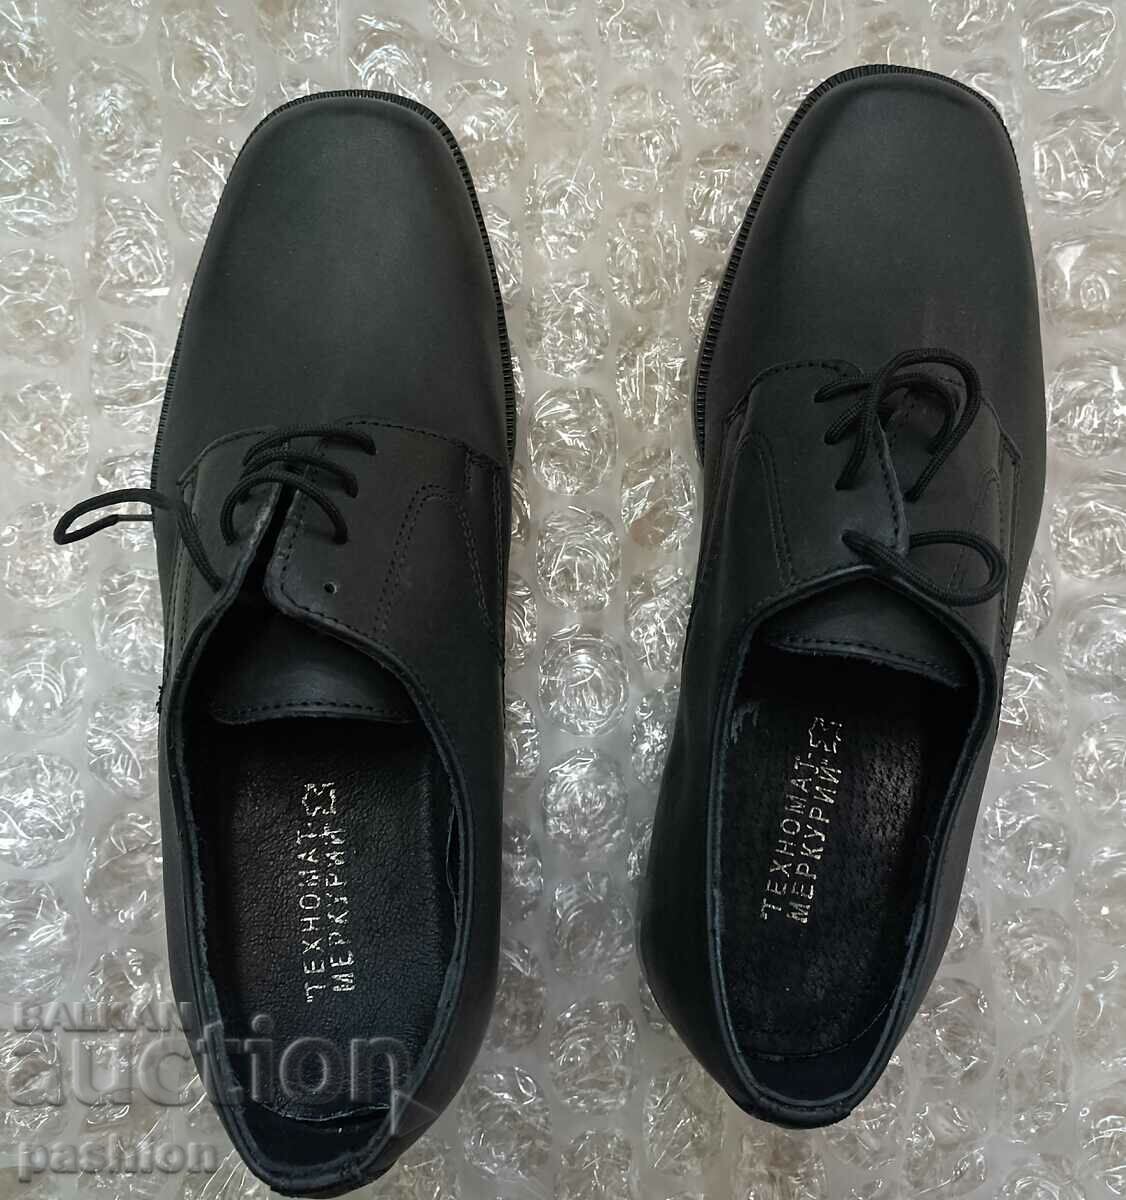 shoes brand new, black size 41, genuine leather, Navy